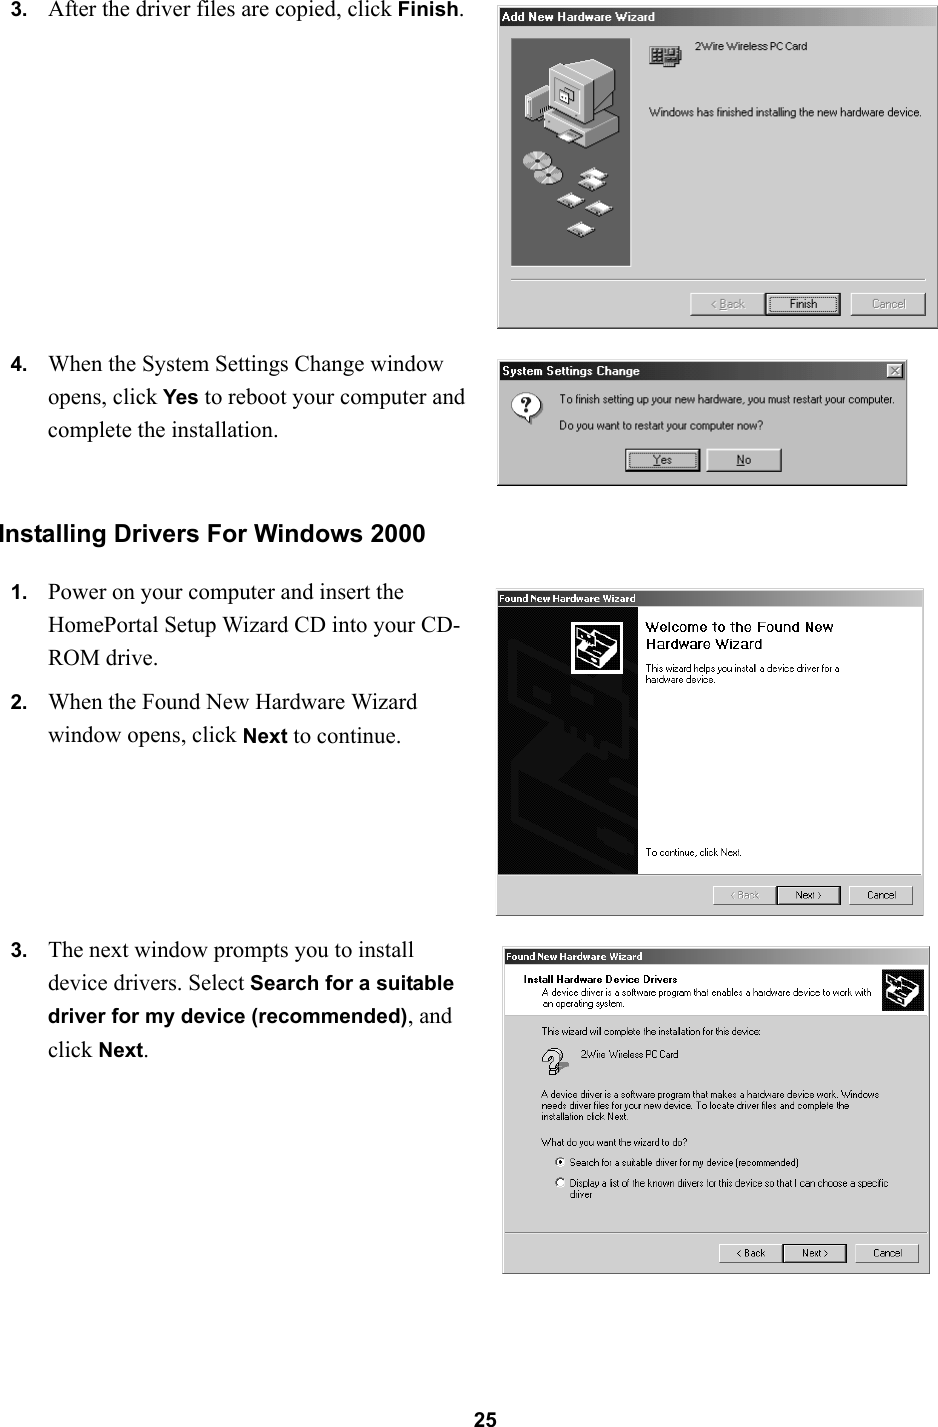 25Installing Drivers For Windows 20003. After the driver files are copied, click Finish.4. When the System Settings Change window opens, click Yes to reboot your computer and complete the installation.1. Power on your computer and insert the HomePortal Setup Wizard CD into your CD-ROM drive.2. When the Found New Hardware Wizard window opens, click Next to continue.3. The next window prompts you to install device drivers. Select Search for a suitable driver for my device (recommended), and click Next.